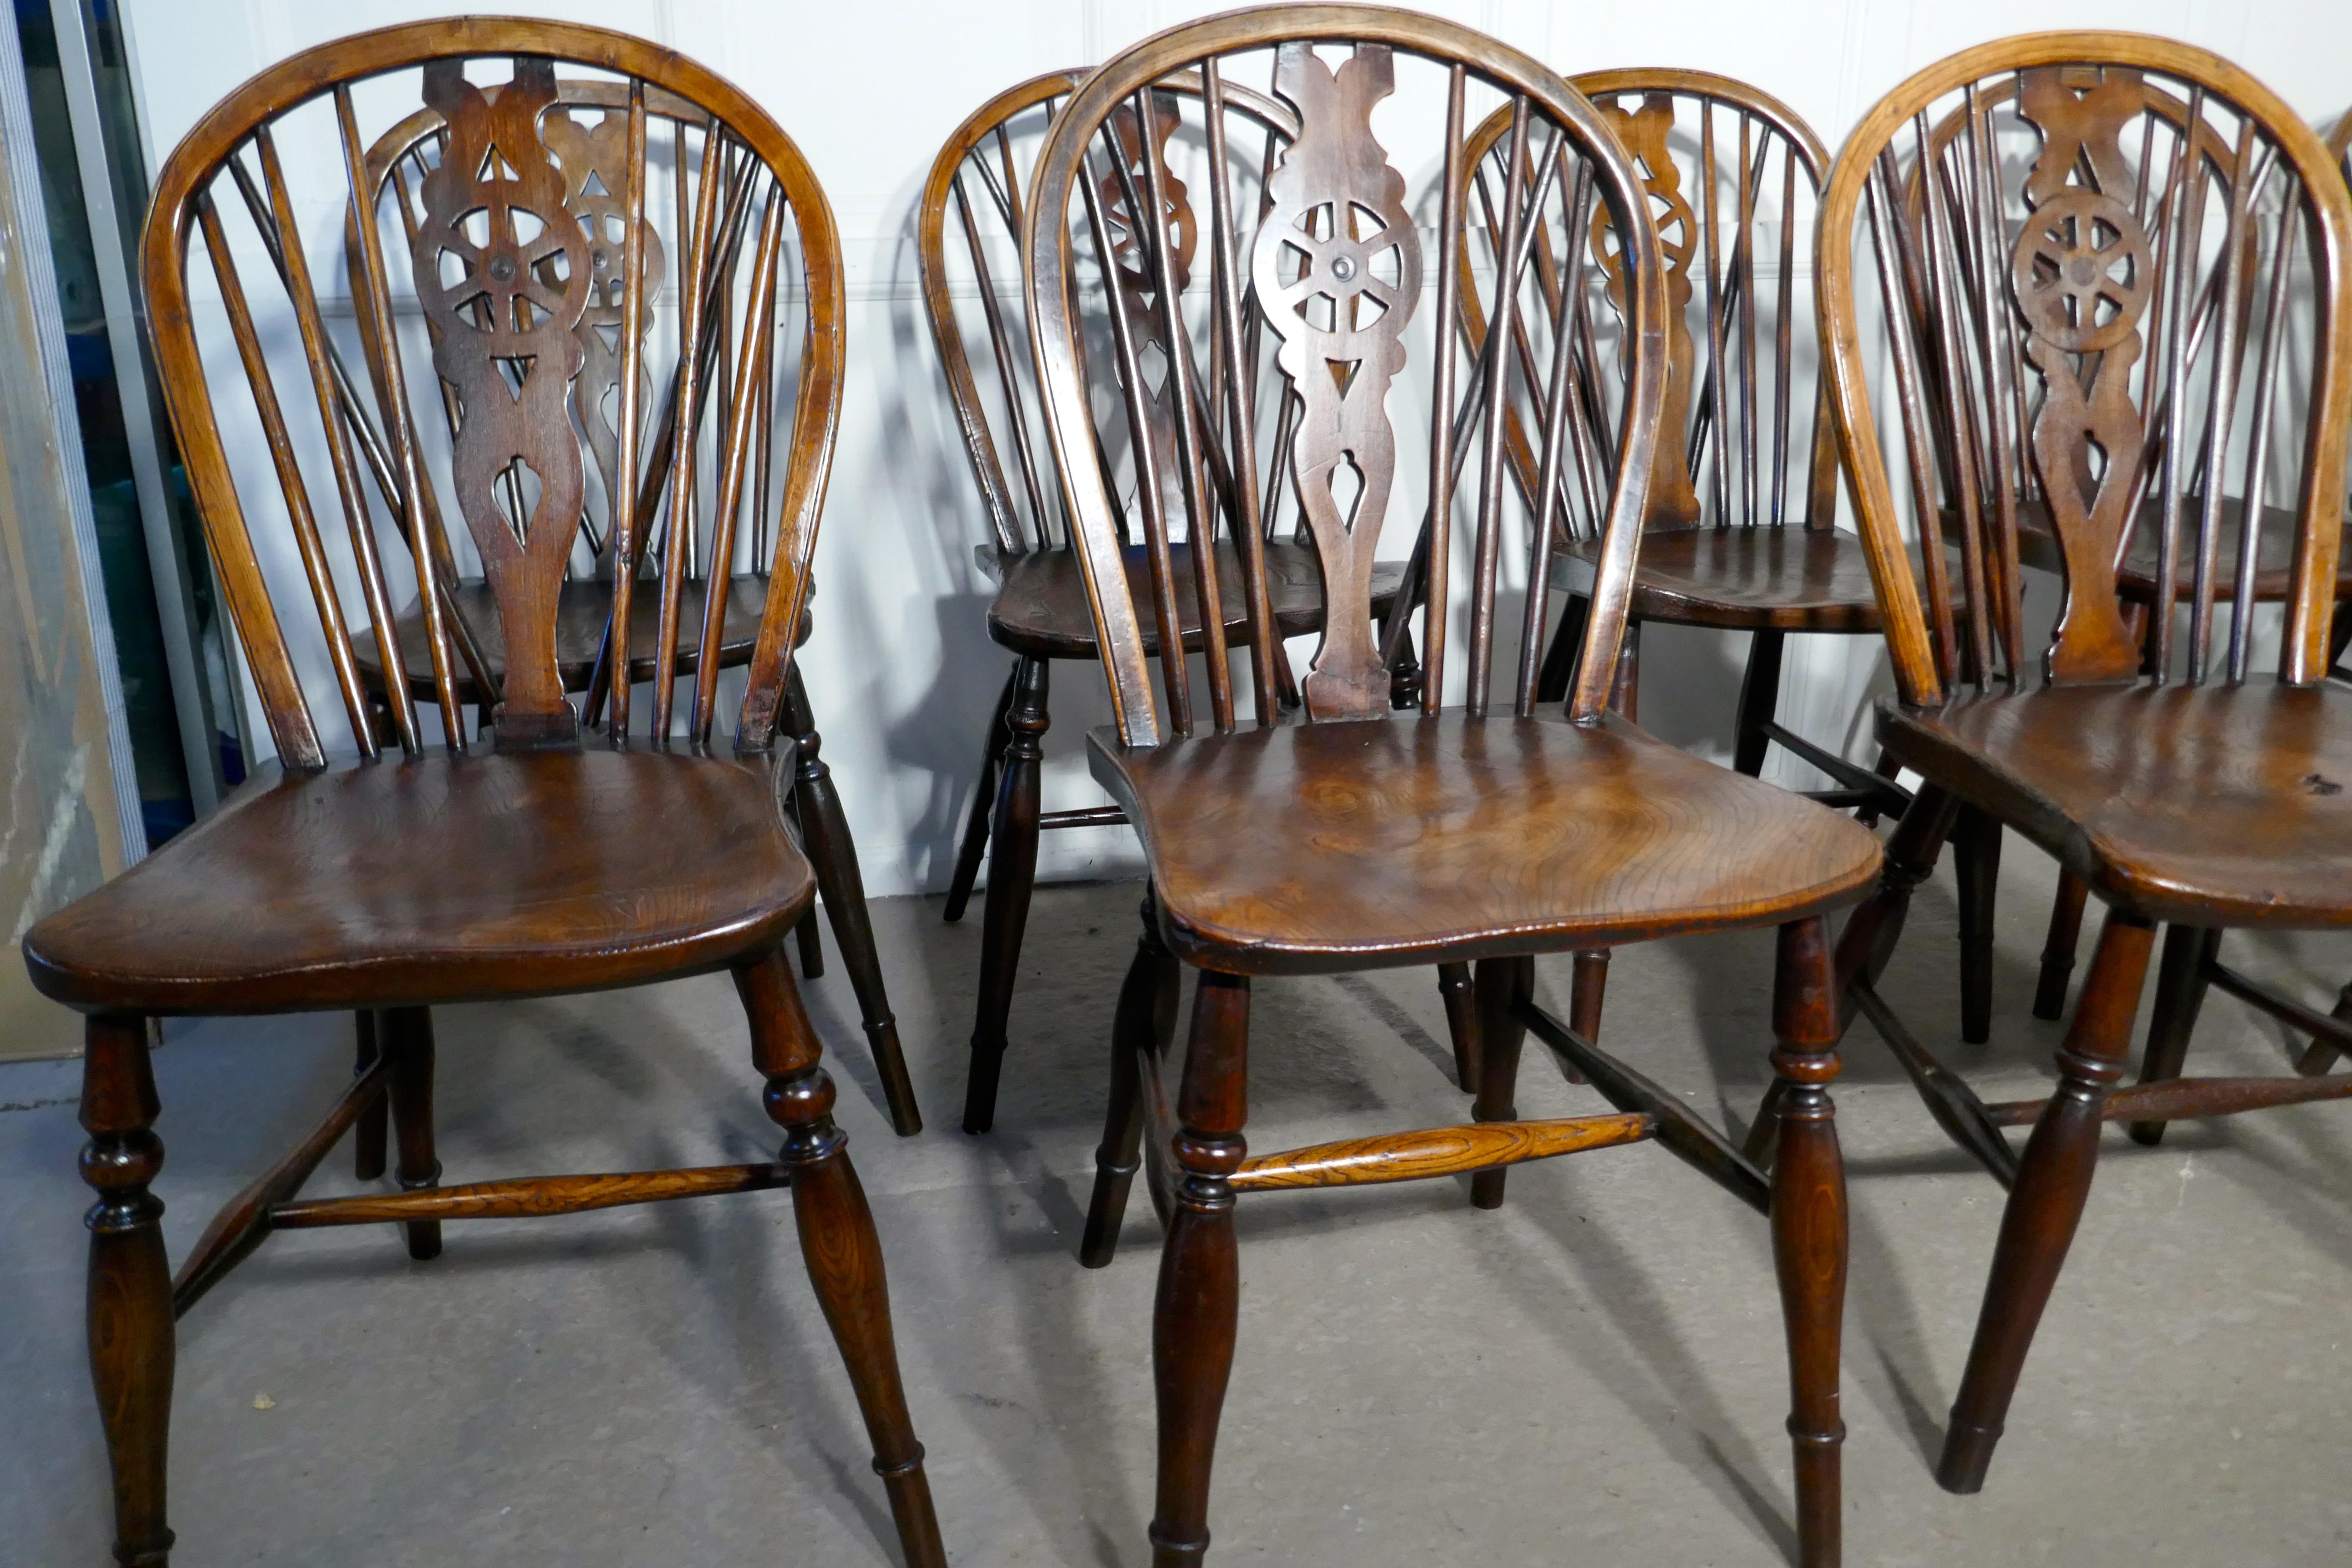 Harlequin set of 10 Victorian beech and elm wheel back Windsor kitchen dining chairs.

The chairs are a classic design and traditionally made from solid wood they have hooped wedge backs in the traditional Windsor style with slight differences in